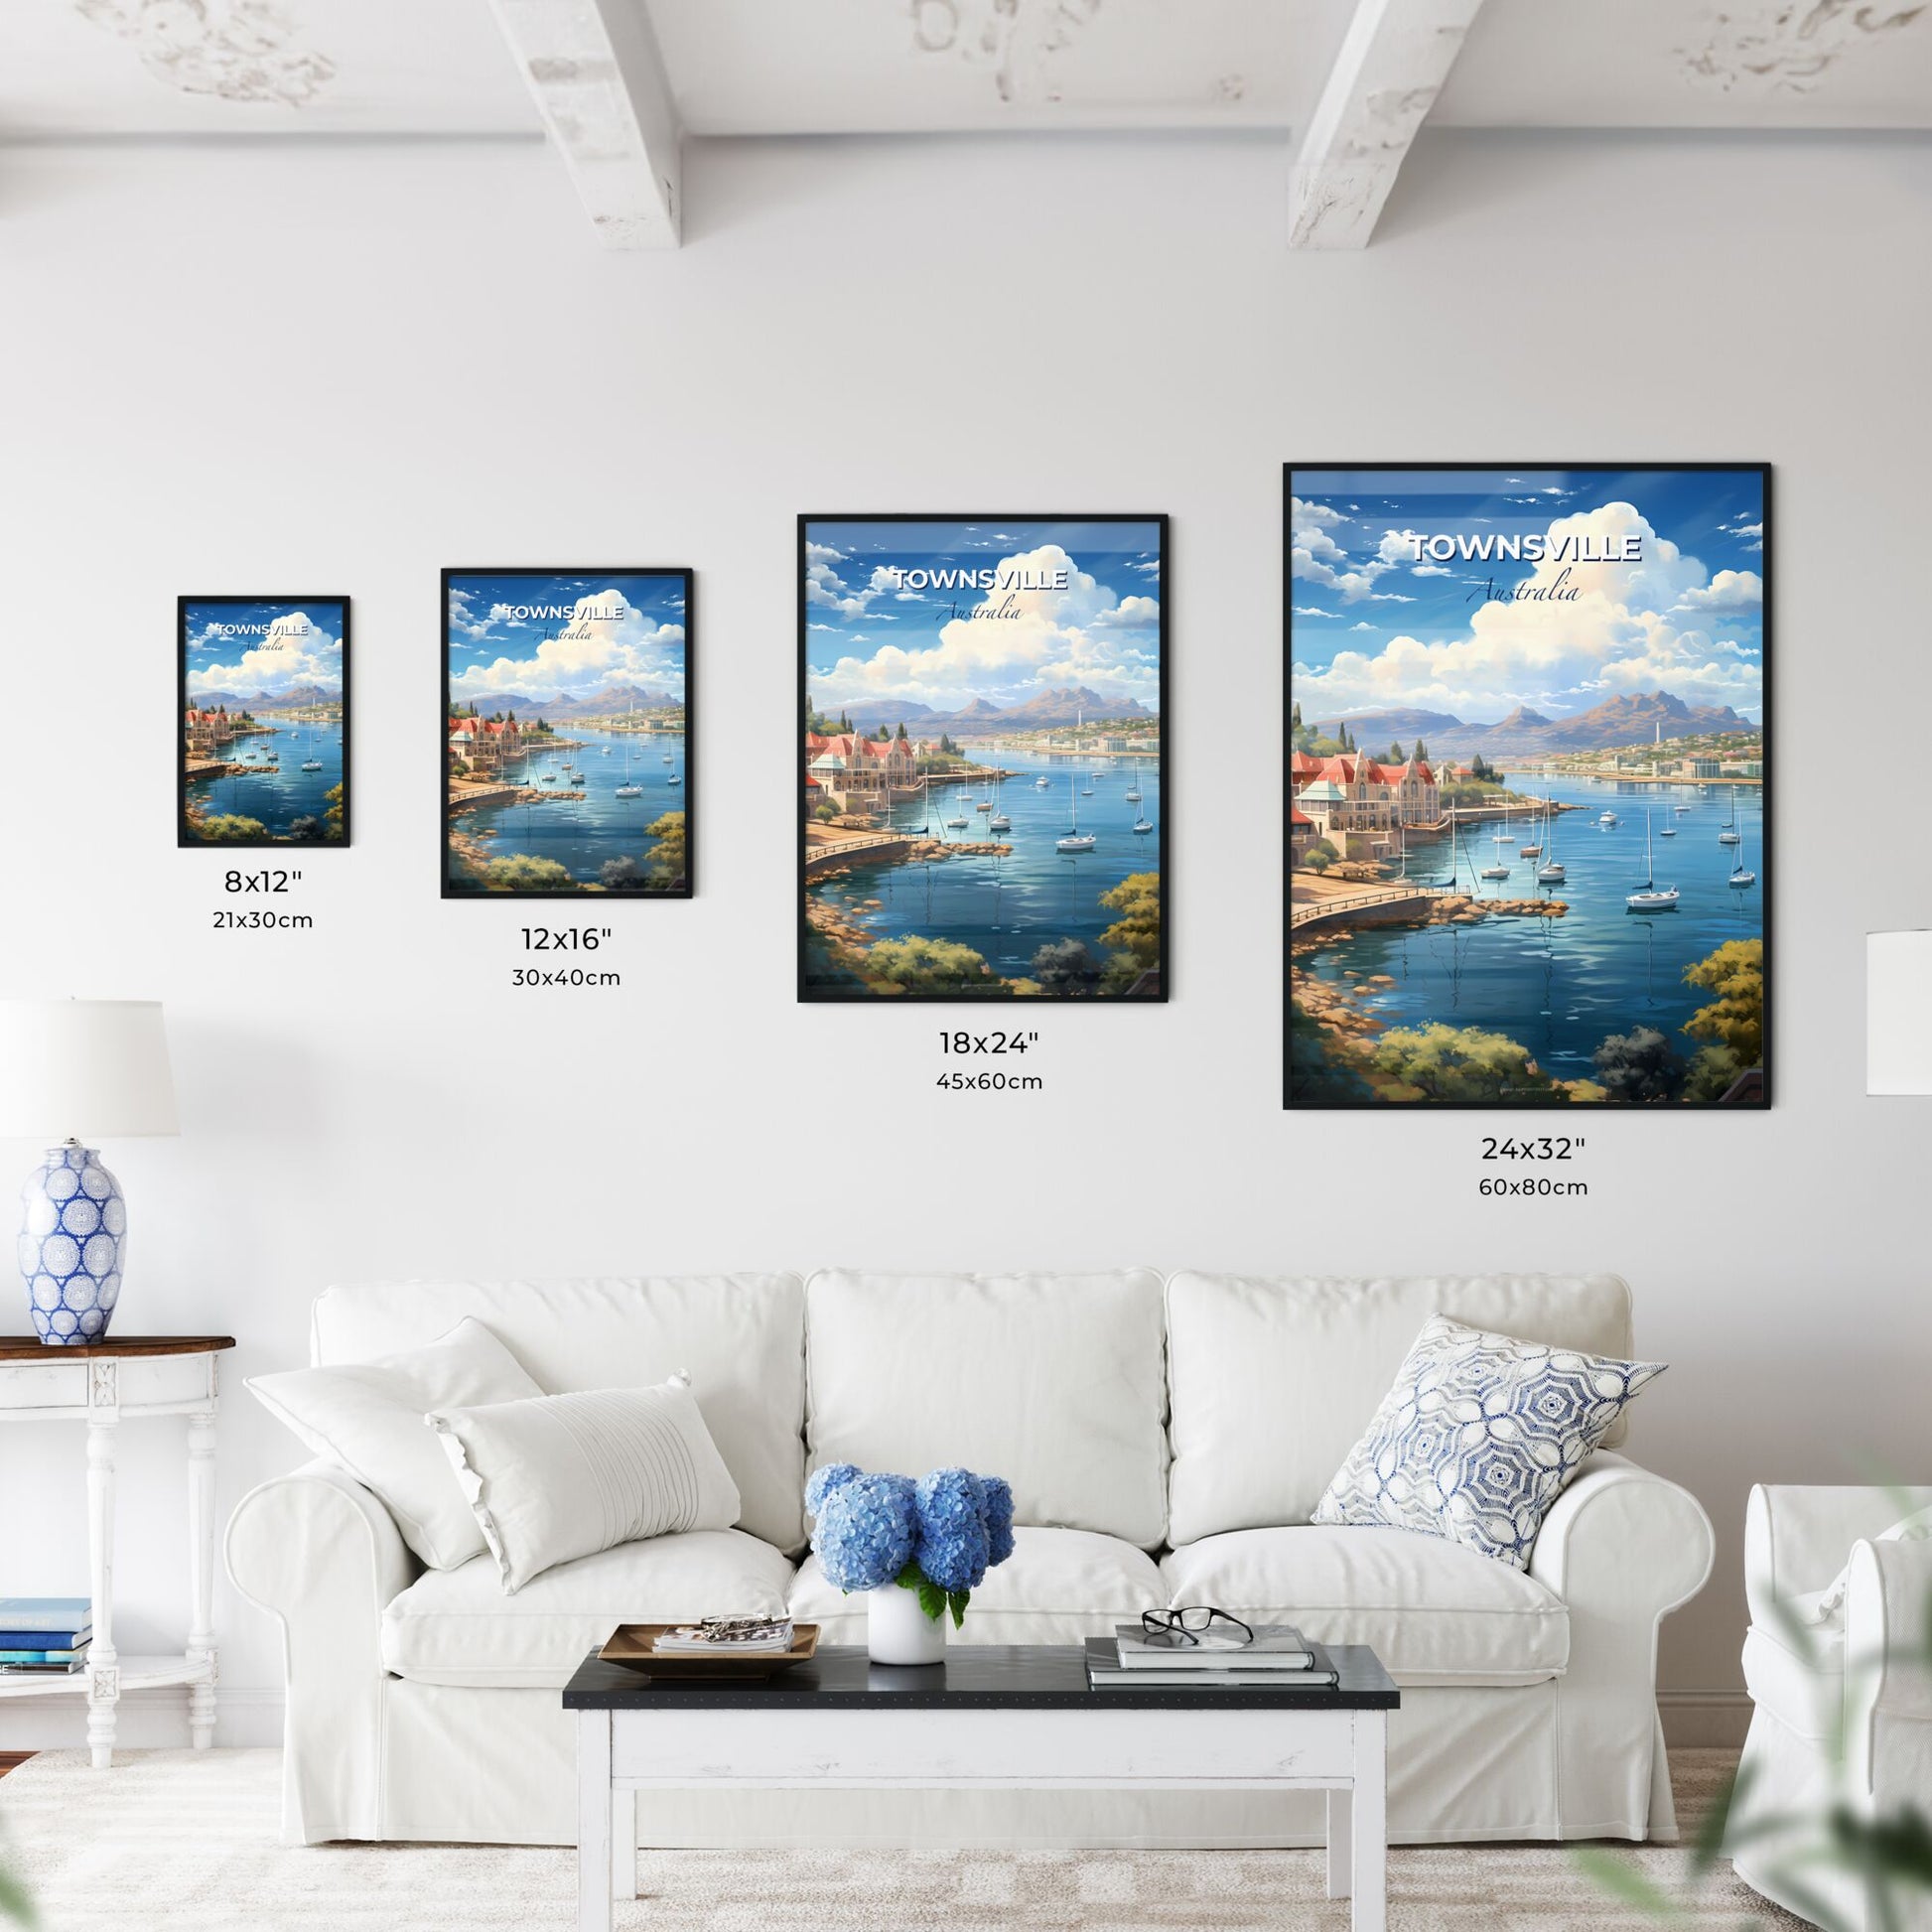 Artful Townsville Skyline: Vibrant Painting with Waterfront and Cityscape Depiction Default Title